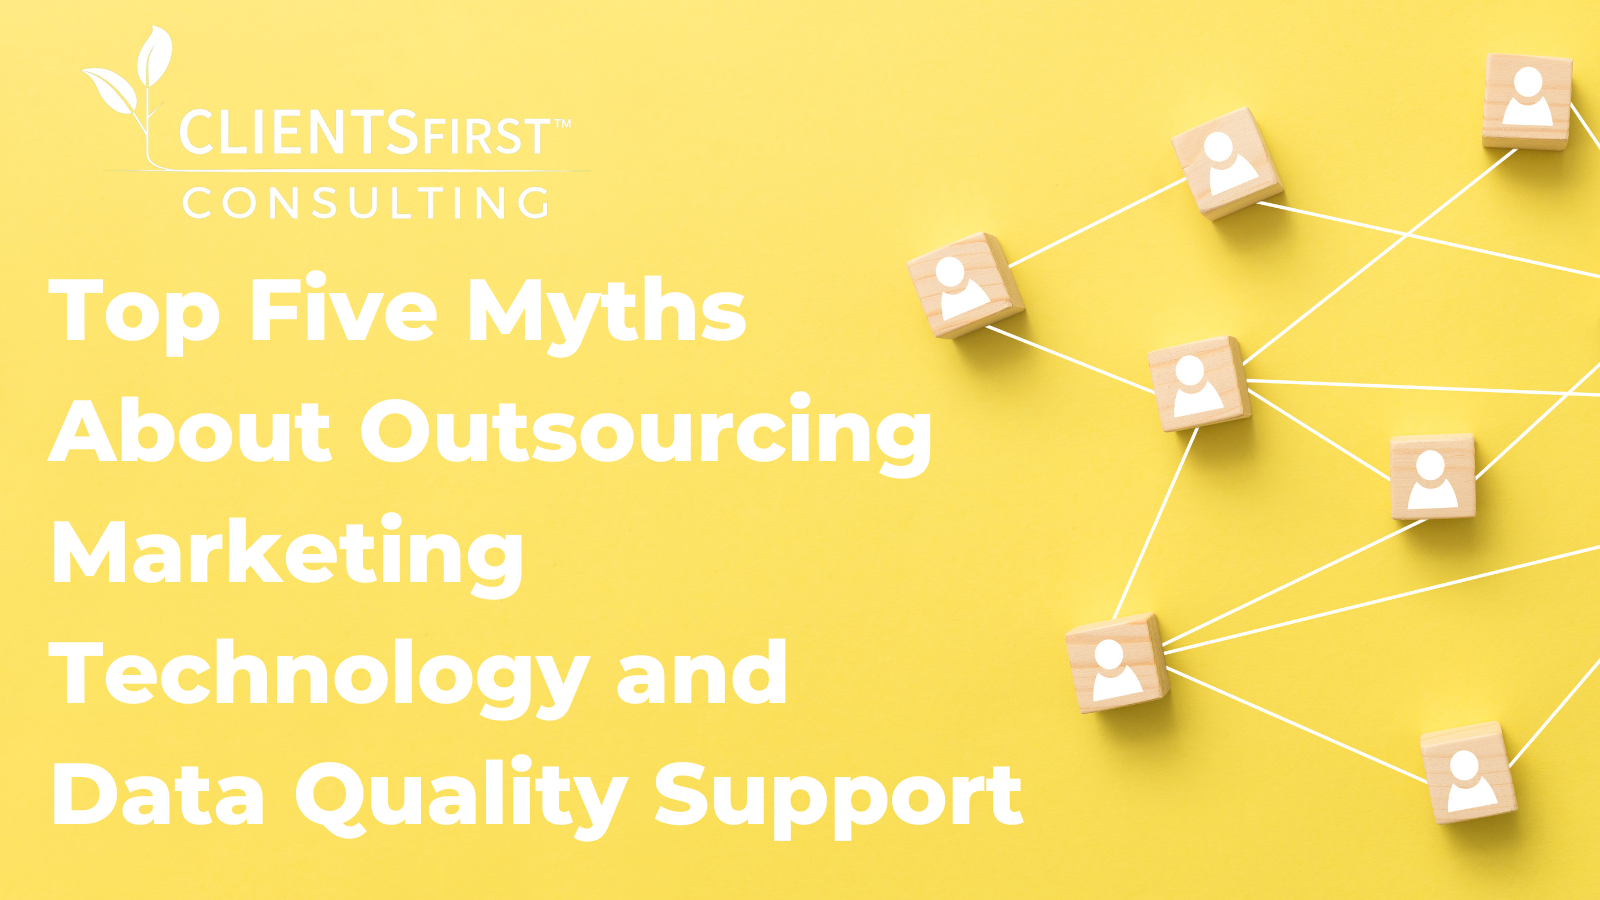 Top Five Myths About Outsourcing Marketing Technology And Data Quality Support